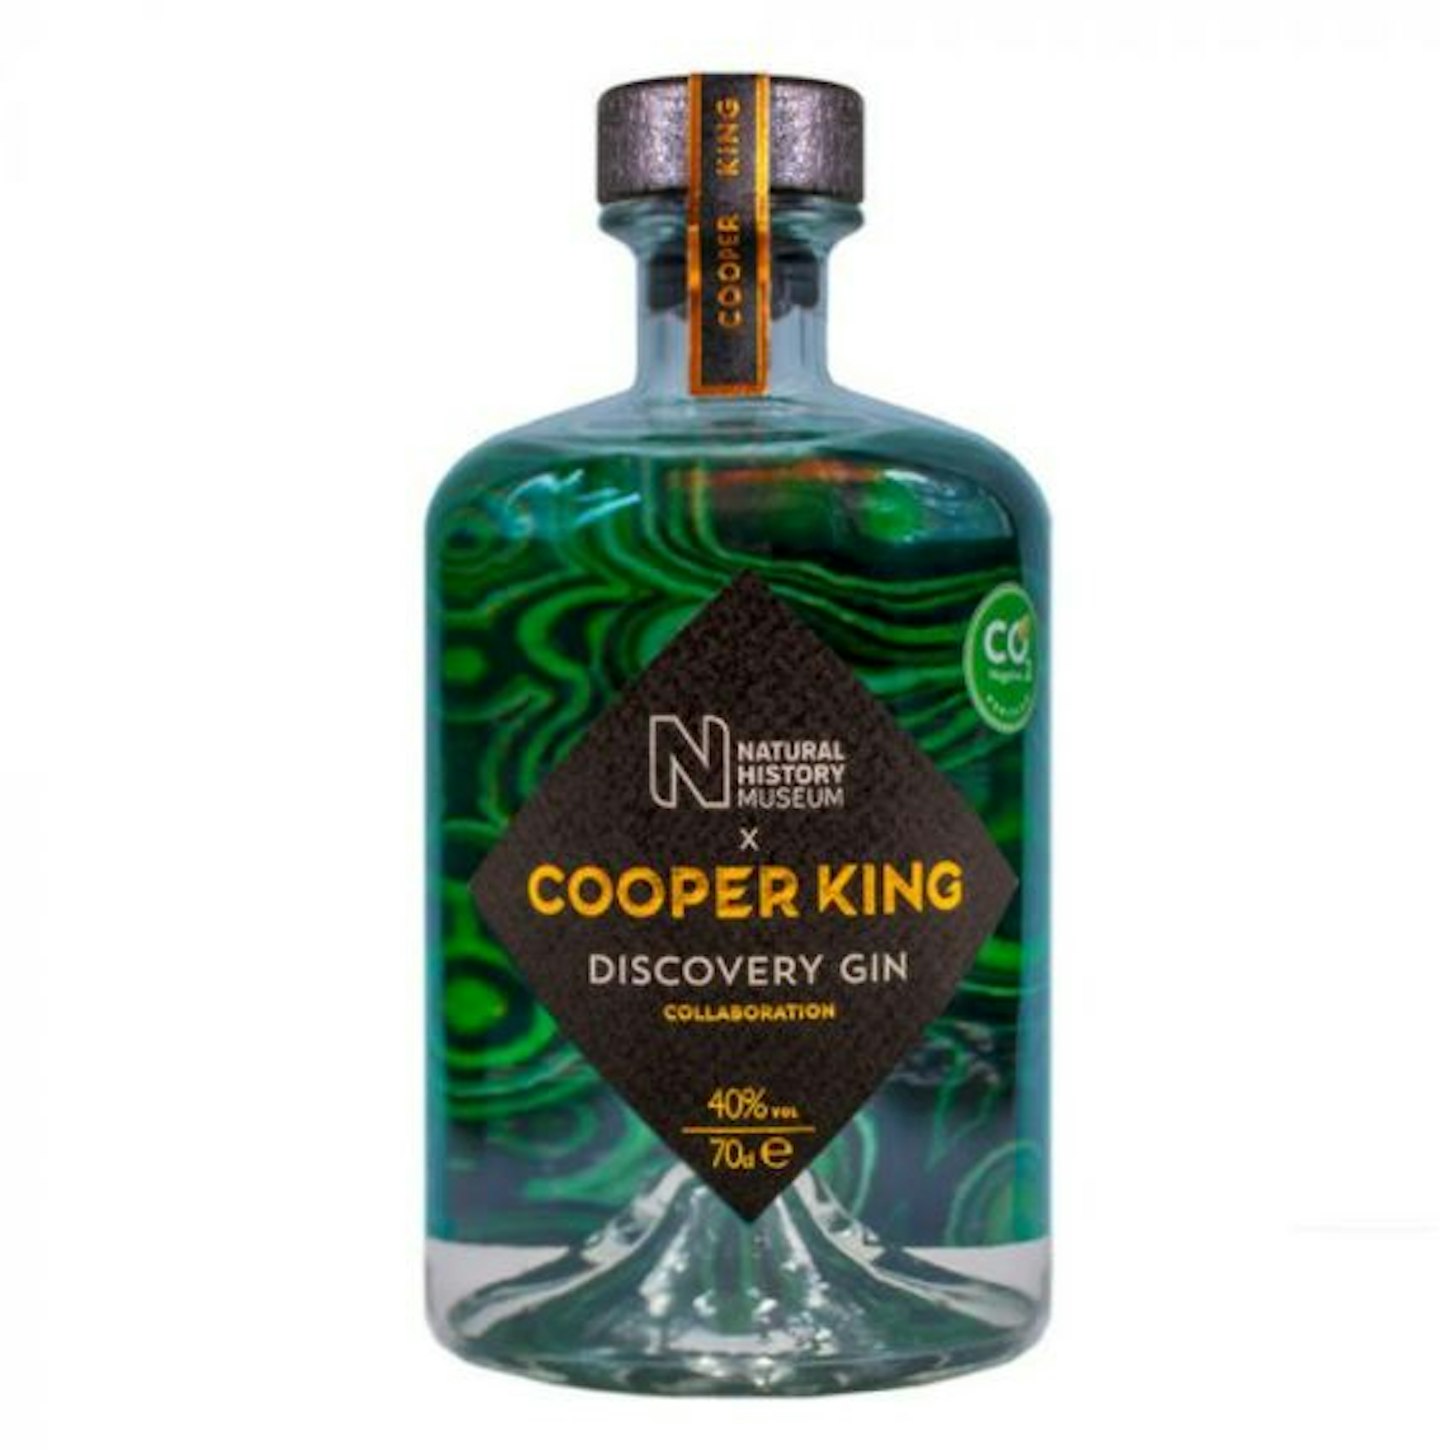 Cooper King Discovery Gin